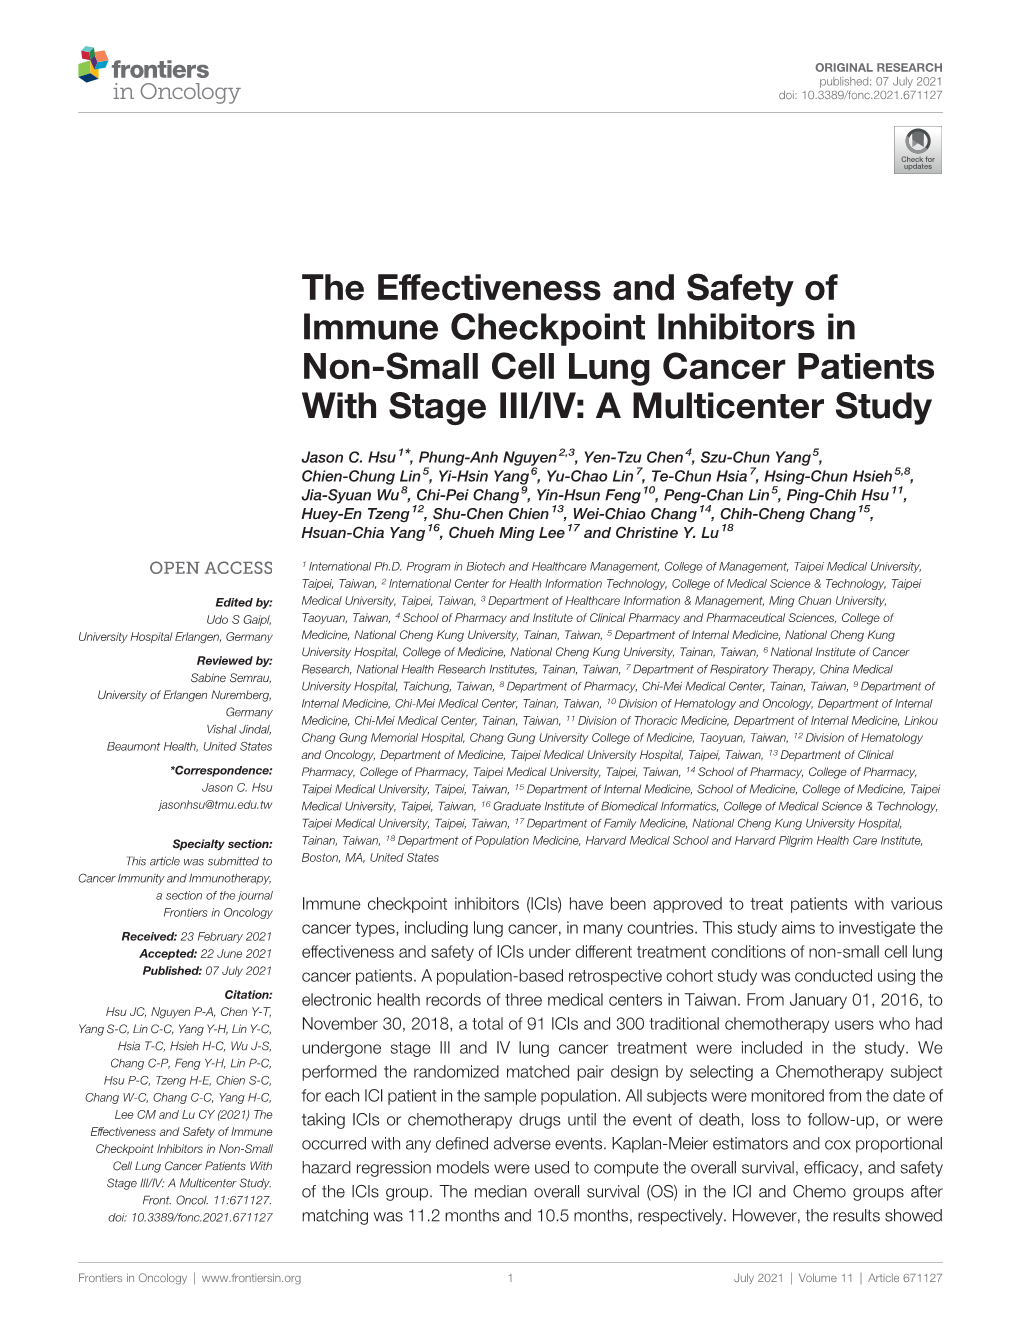 The Effectiveness and Safety of Immune Checkpoint Inhibitors in Non-Small Cell Lung Cancer Patients with Stage III/IV: a Multicenter Study